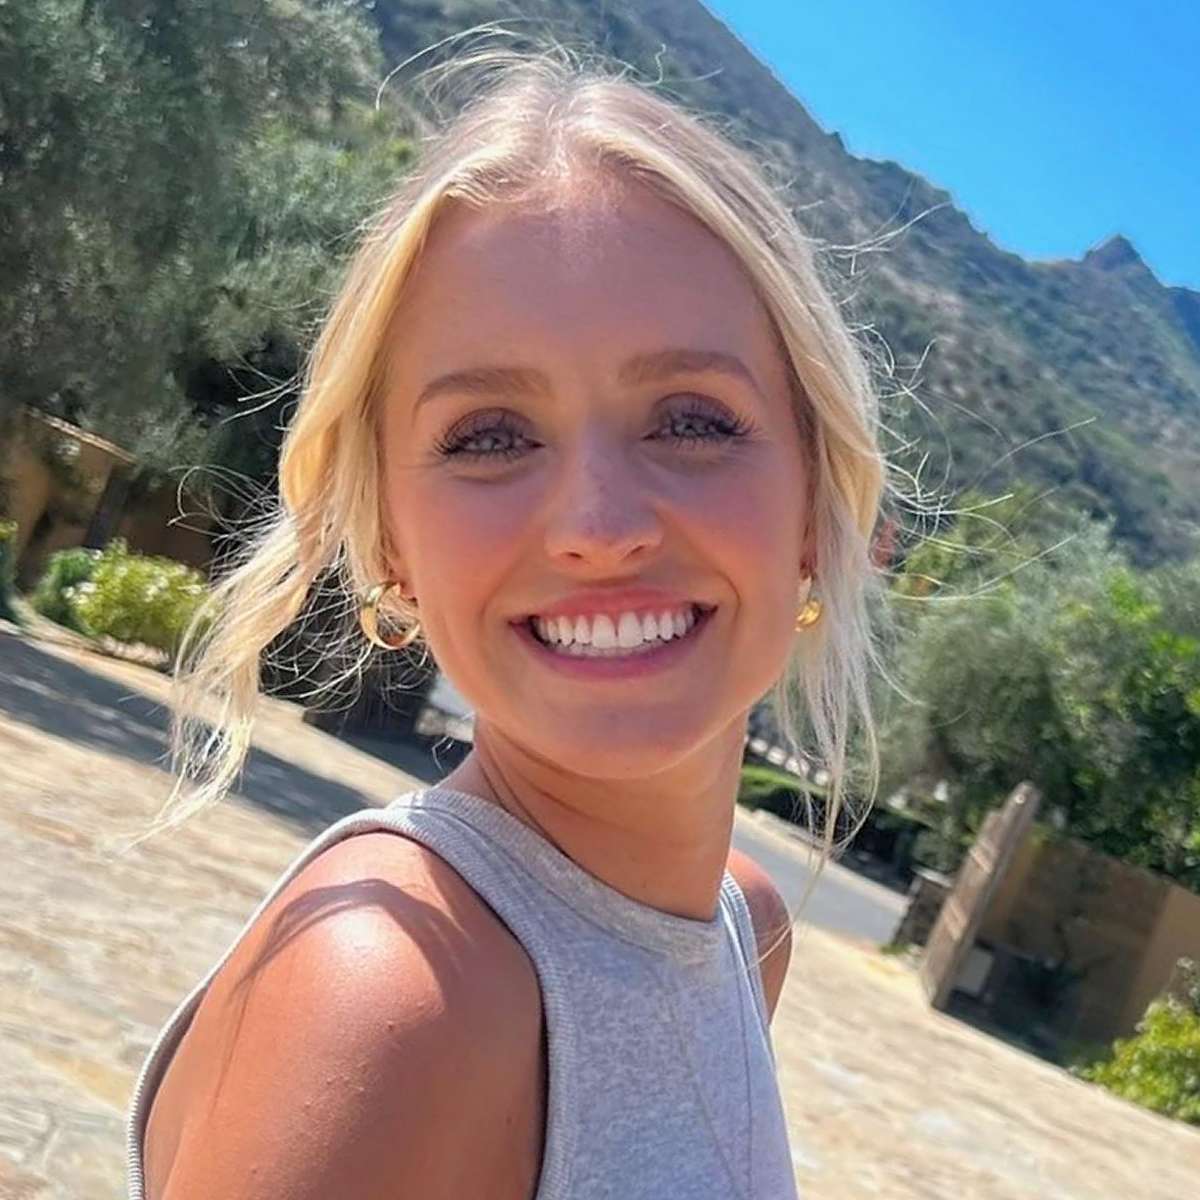 'The Bachelor's Daisy Kent reveals startling details of her painful Lyme disease treatment